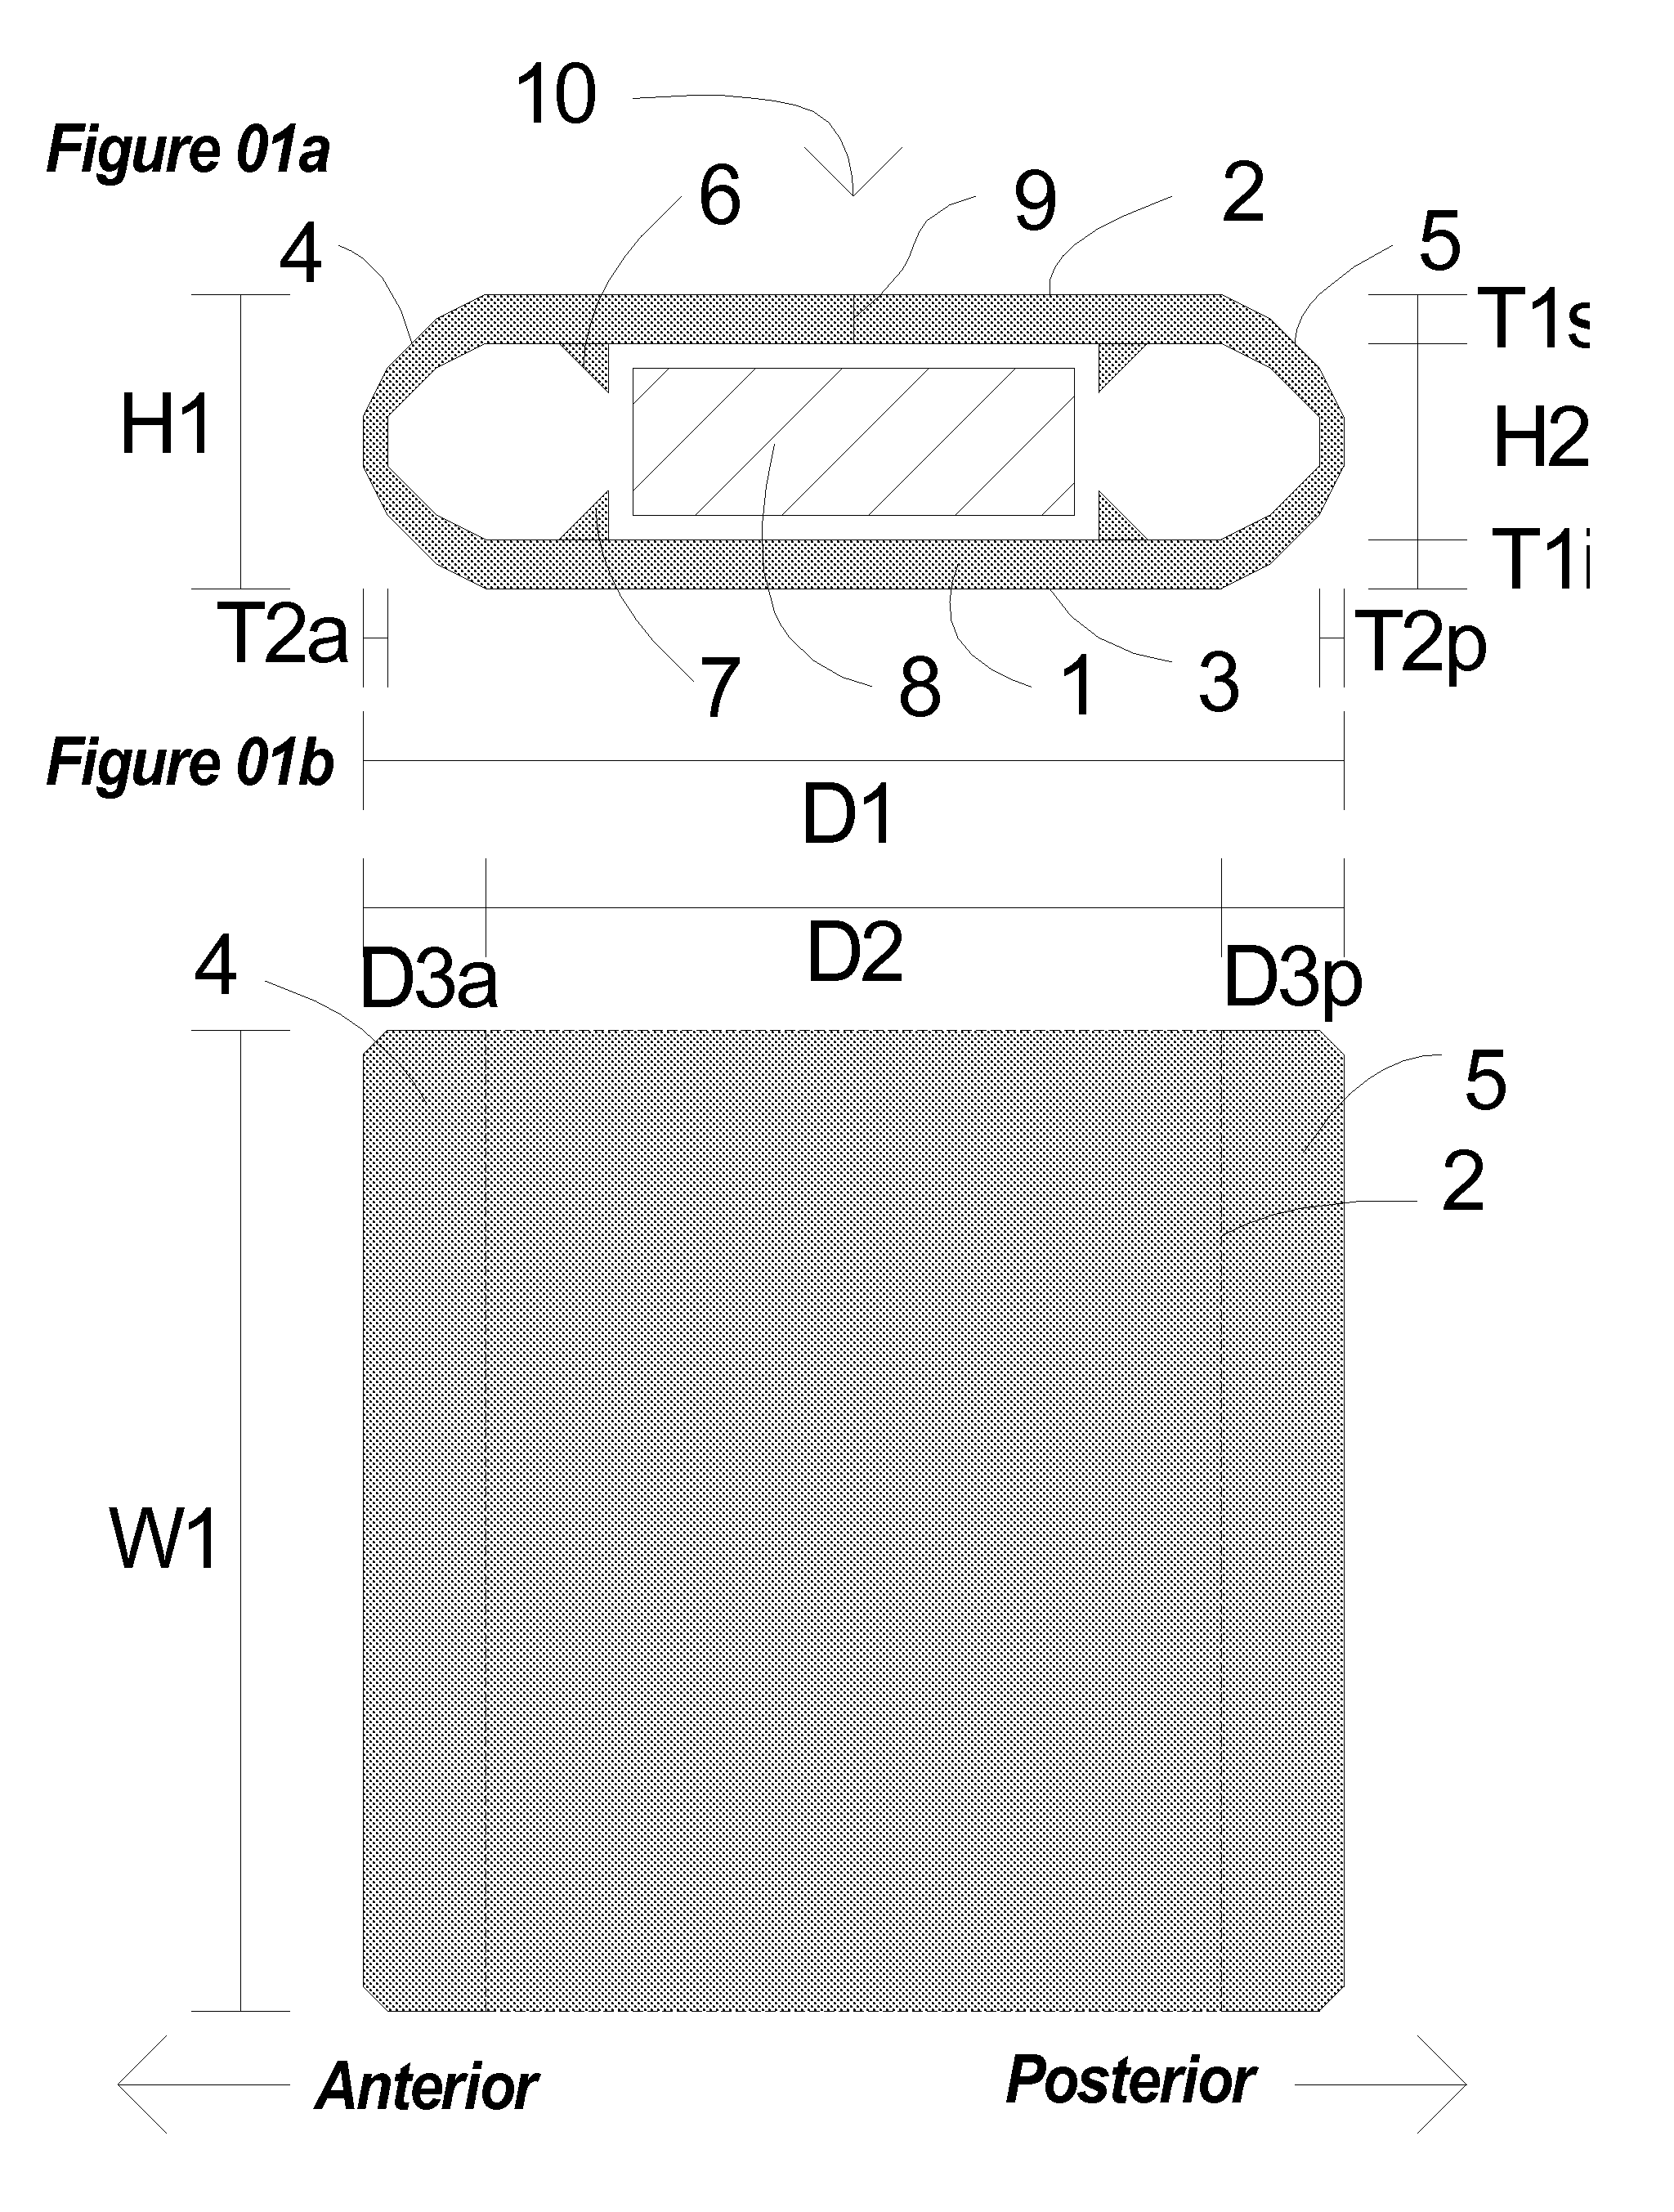 Method, apparatus, surgical technique, surgical tools, and materials for minimally invasive enhanced fusion and restoration of kinematically physiologic spinal movement